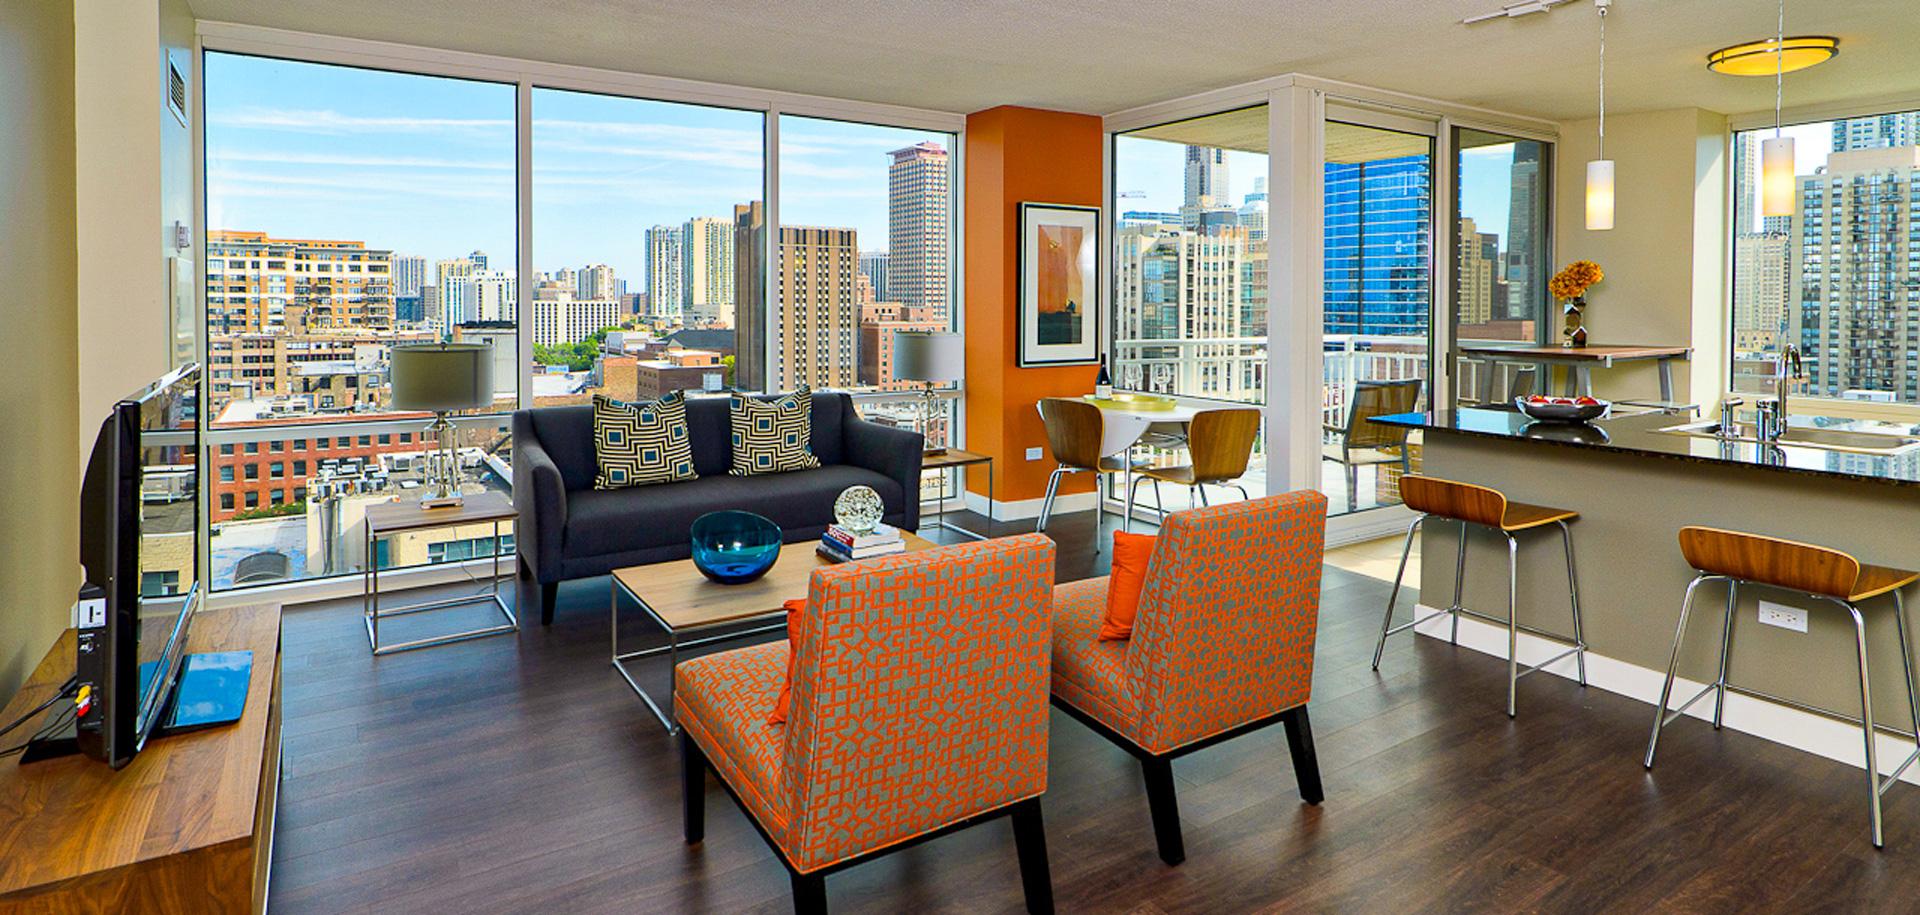 Living room with a view Flair Tower River North